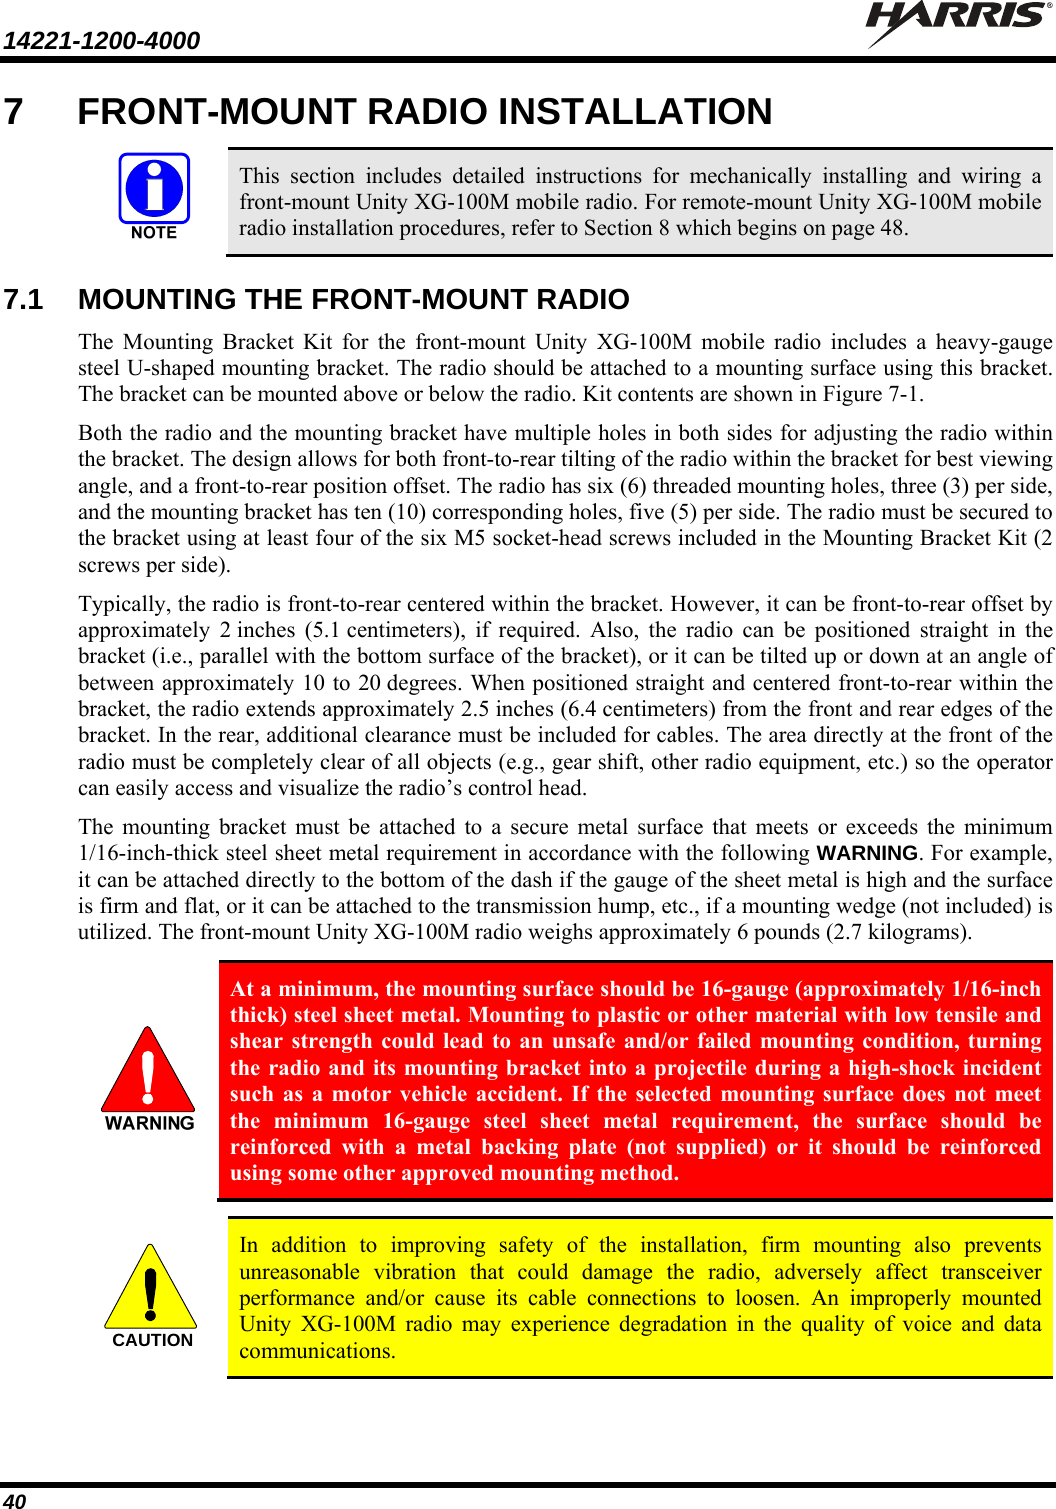 14221-1200-4000    40 7  FRONT-MOUNT RADIO INSTALLATION   This section includes detailed instructions for mechanically installing and wiring a front-mount Unity XG-100M mobile radio. For remote-mount Unity XG-100M mobile radio installation procedures, refer to Section 8 which begins on page 48. 7.1  MOUNTING THE FRONT-MOUNT RADIO The Mounting Bracket Kit for the front-mount Unity XG-100M mobile radio includes a heavy-gauge steel U-shaped mounting bracket. The radio should be attached to a mounting surface using this bracket. The bracket can be mounted above or below the radio. Kit contents are shown in Figure 7-1. Both the radio and the mounting bracket have multiple holes in both sides for adjusting the radio within the bracket. The design allows for both front-to-rear tilting of the radio within the bracket for best viewing angle, and a front-to-rear position offset. The radio has six (6) threaded mounting holes, three (3) per side, and the mounting bracket has ten (10) corresponding holes, five (5) per side. The radio must be secured to the bracket using at least four of the six M5 socket-head screws included in the Mounting Bracket Kit (2 screws per side). Typically, the radio is front-to-rear centered within the bracket. However, it can be front-to-rear offset by approximately 2 inches (5.1 centimeters), if required. Also, the radio can be positioned straight in the bracket (i.e., parallel with the bottom surface of the bracket), or it can be tilted up or down at an angle of between approximately 10 to 20 degrees. When positioned straight and centered front-to-rear within the bracket, the radio extends approximately 2.5 inches (6.4 centimeters) from the front and rear edges of the bracket. In the rear, additional clearance must be included for cables. The area directly at the front of the radio must be completely clear of all objects (e.g., gear shift, other radio equipment, etc.) so the operator can easily access and visualize the radio’s control head. The mounting bracket must be attached to a secure metal surface that meets or exceeds the minimum 1/16-inch-thick steel sheet metal requirement in accordance with the following WARNING. For example, it can be attached directly to the bottom of the dash if the gauge of the sheet metal is high and the surface is firm and flat, or it can be attached to the transmission hump, etc., if a mounting wedge (not included) is utilized. The front-mount Unity XG-100M radio weighs approximately 6 pounds (2.7 kilograms).   At a minimum, the mounting surface should be 16-gauge (approximately 1/16-inch thick) steel sheet metal. Mounting to plastic or other material with low tensile and shear strength could lead to an unsafe and/or failed mounting condition, turning the radio and its mounting bracket into a projectile during a high-shock incident such as a motor vehicle accident. If the selected mounting surface does not meet the minimum 16-gauge steel sheet metal requirement, the surface should be reinforced with a metal backing plate (not supplied) or it should be reinforced using some other approved mounting method.   In addition to improving safety of the installation, firm mounting also prevents unreasonable vibration that could damage the radio, adversely affect transceiver performance and/or cause its cable connections to loosen. An improperly mounted Unity XG-100M radio may experience degradation in the quality of voice and data communications.  CAUTION